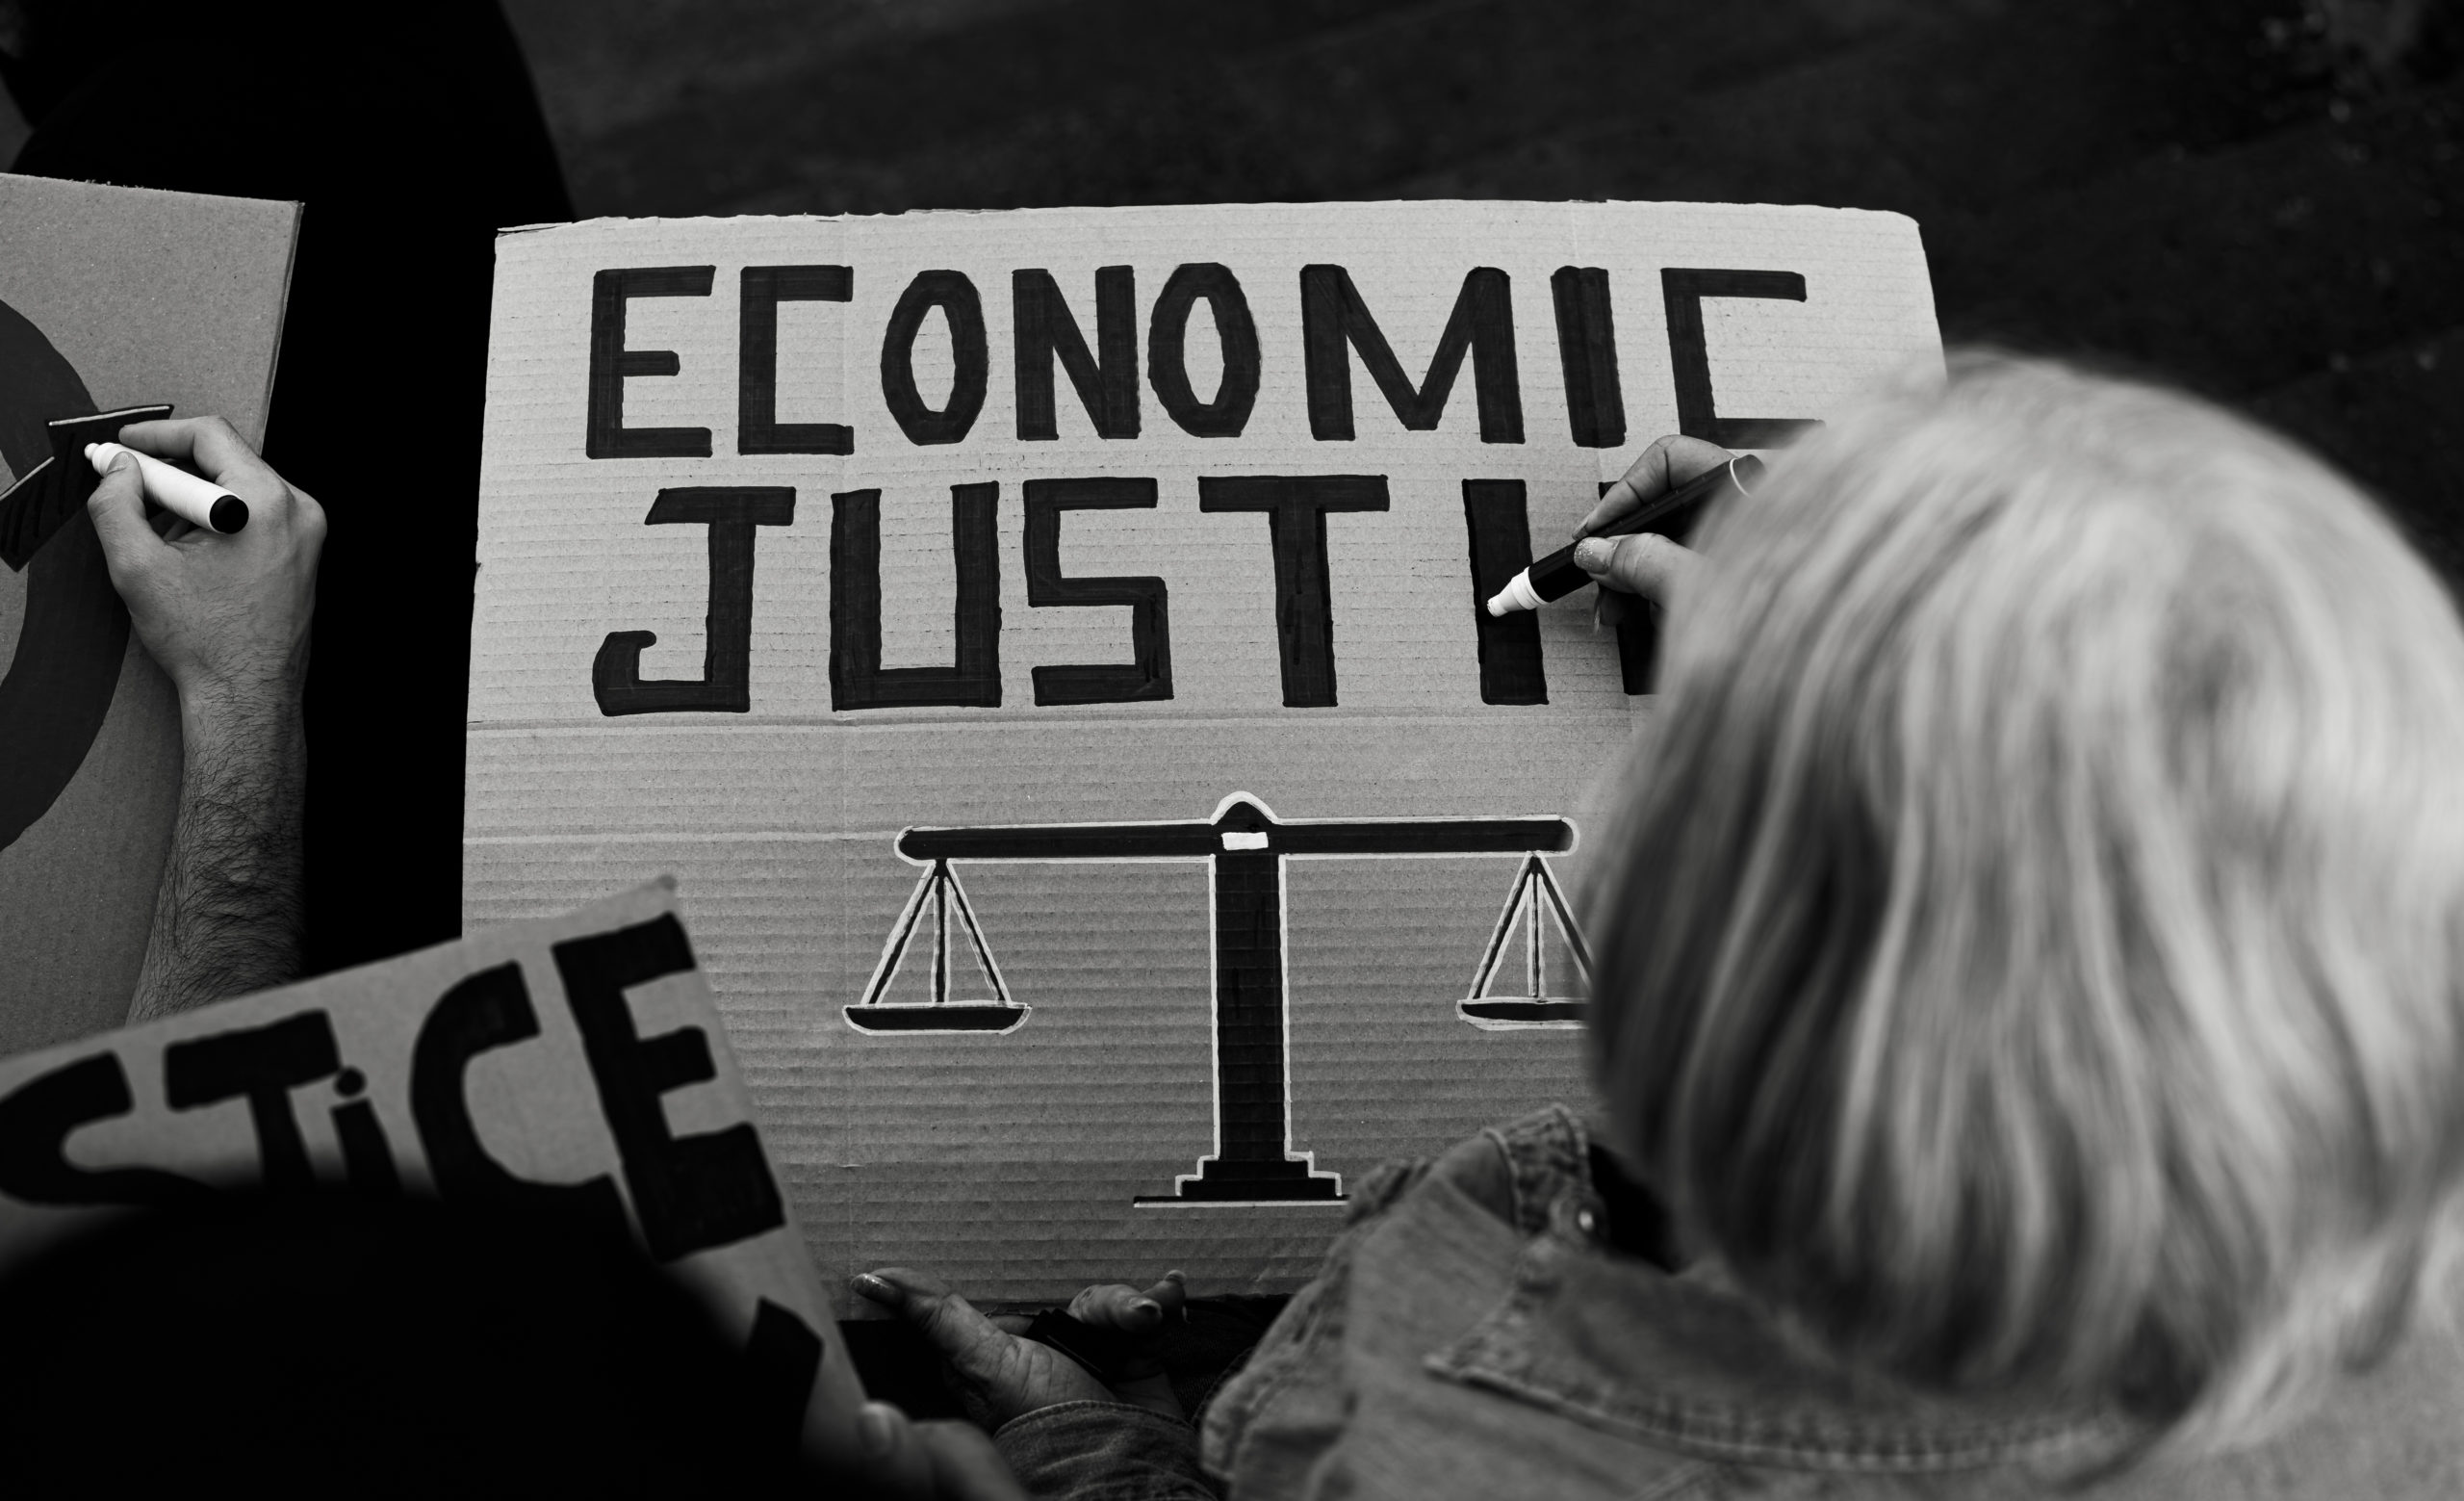 A black and white image of a person writing a protest sign that reads “Economic Justice” with an image of a justice scale.